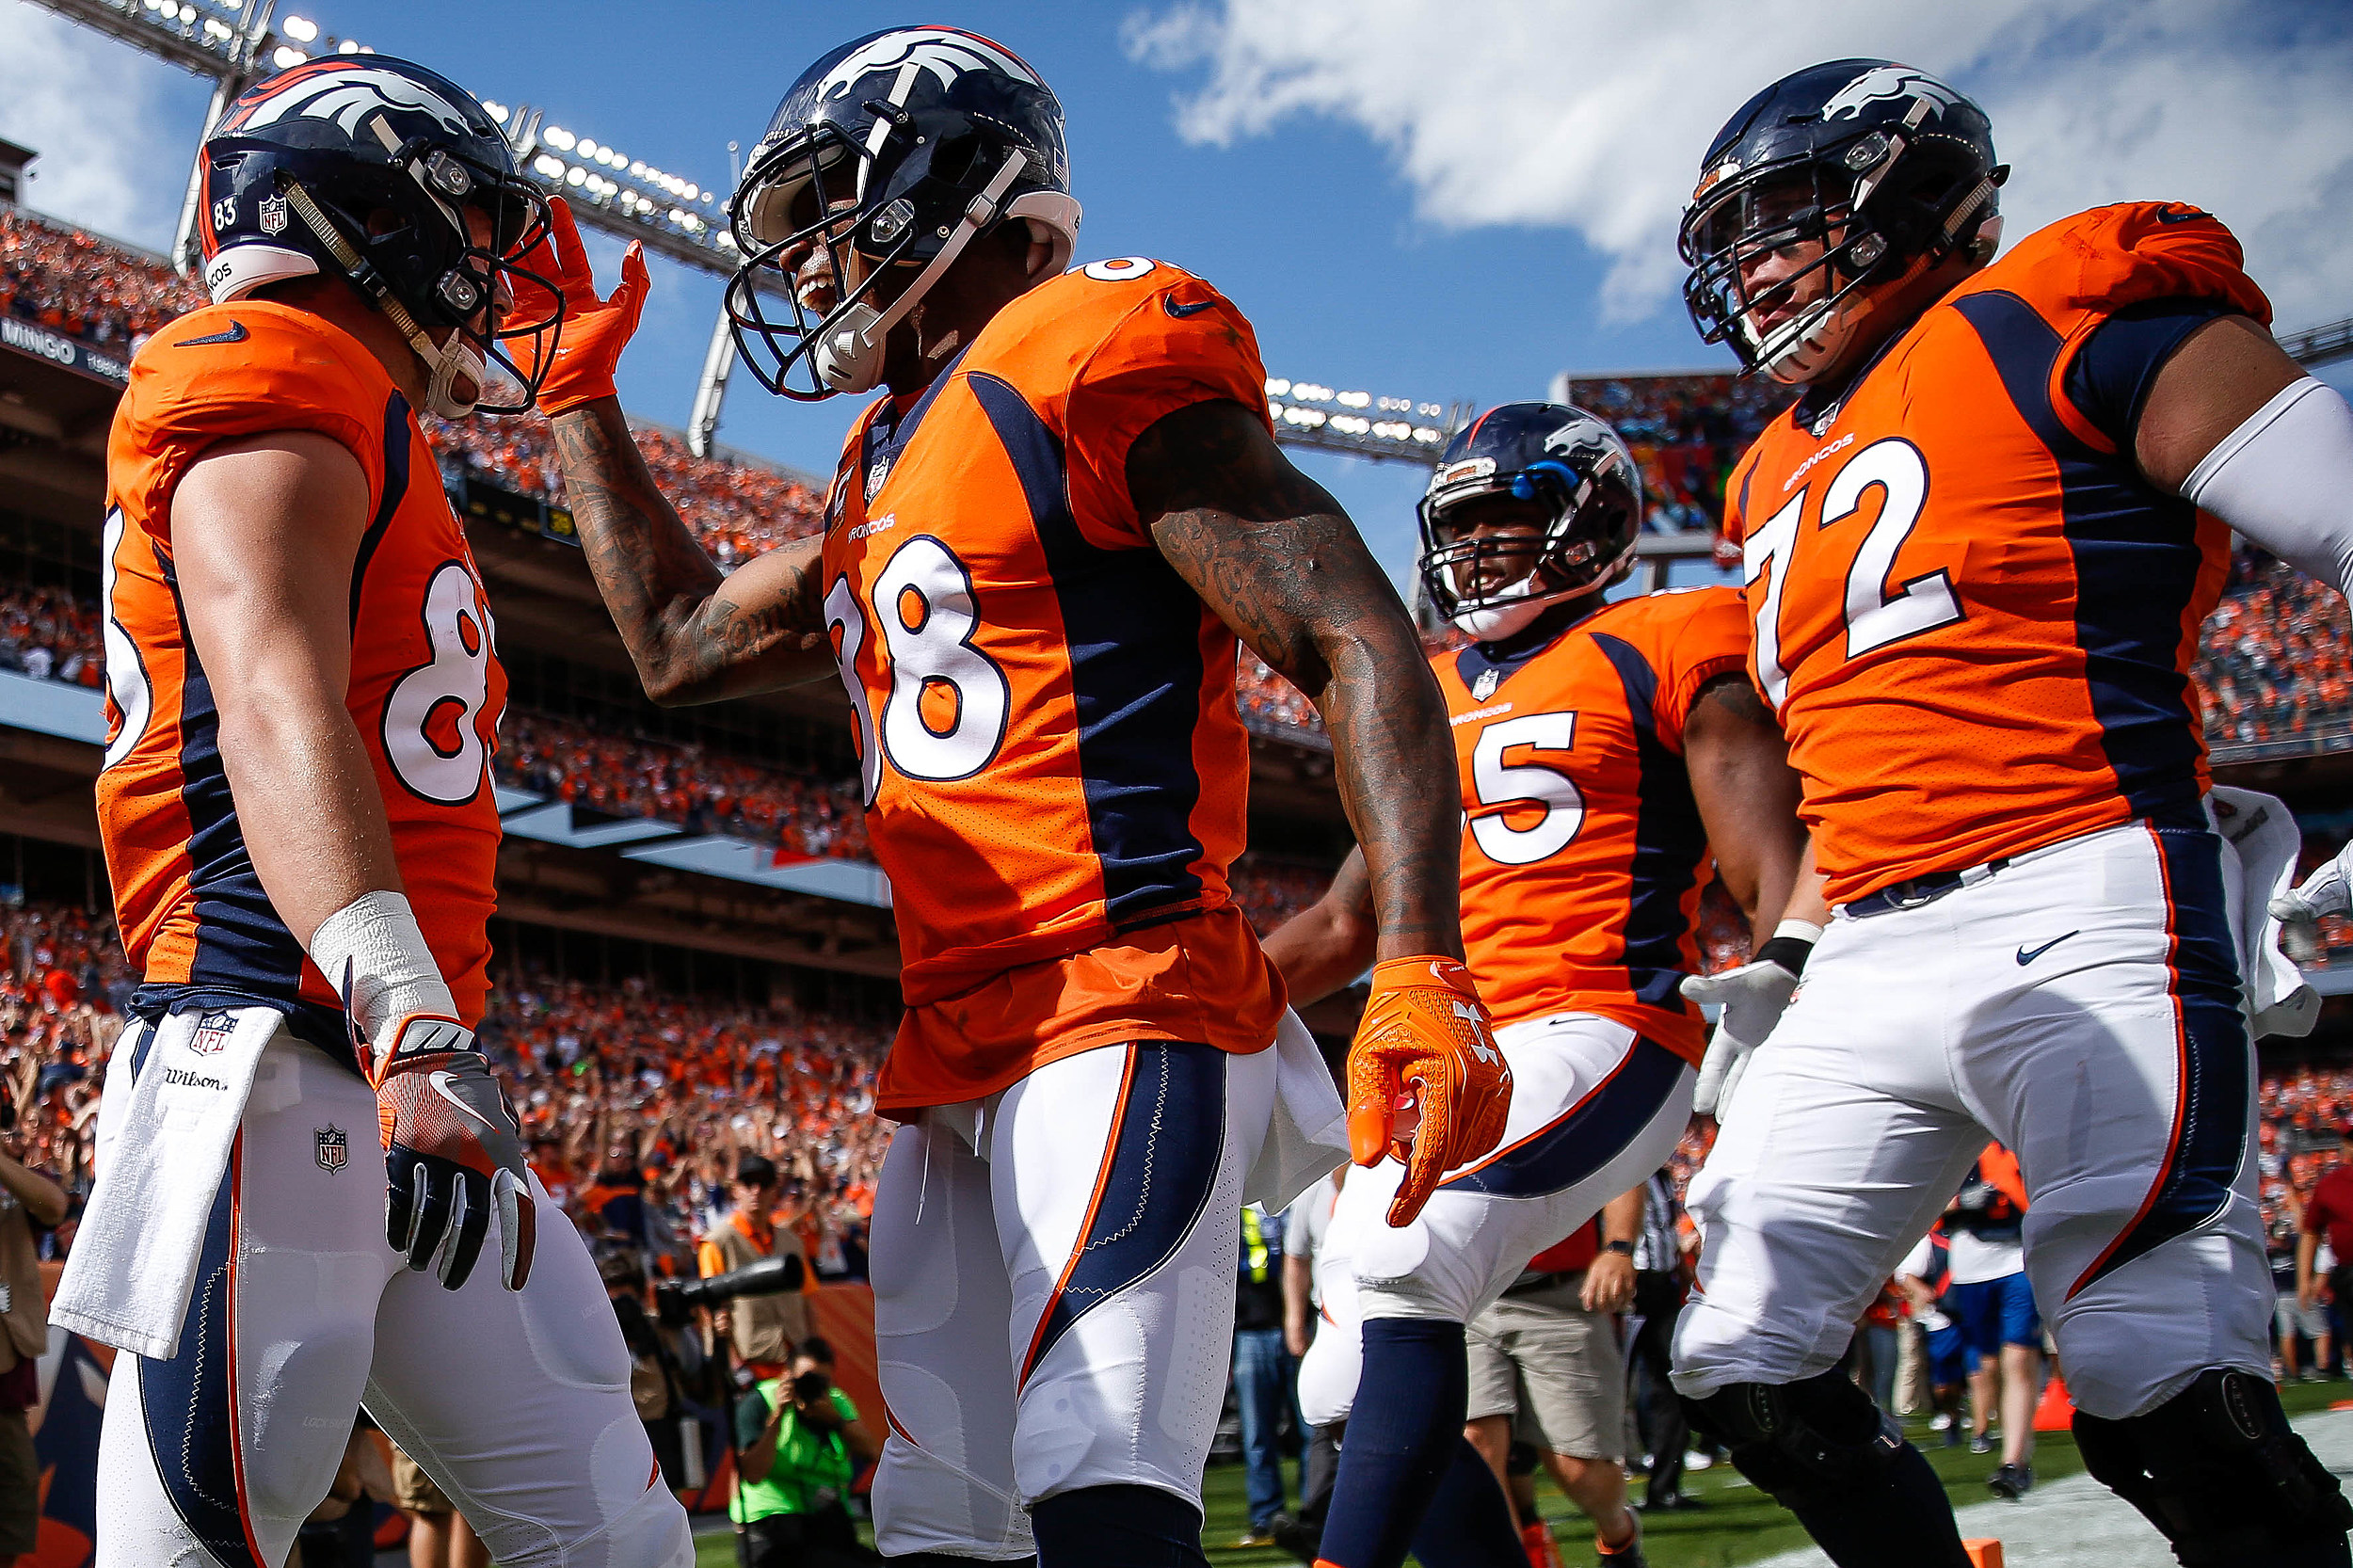 Von Miller honors the late Demaryius Thomas ahead of Rams playoff